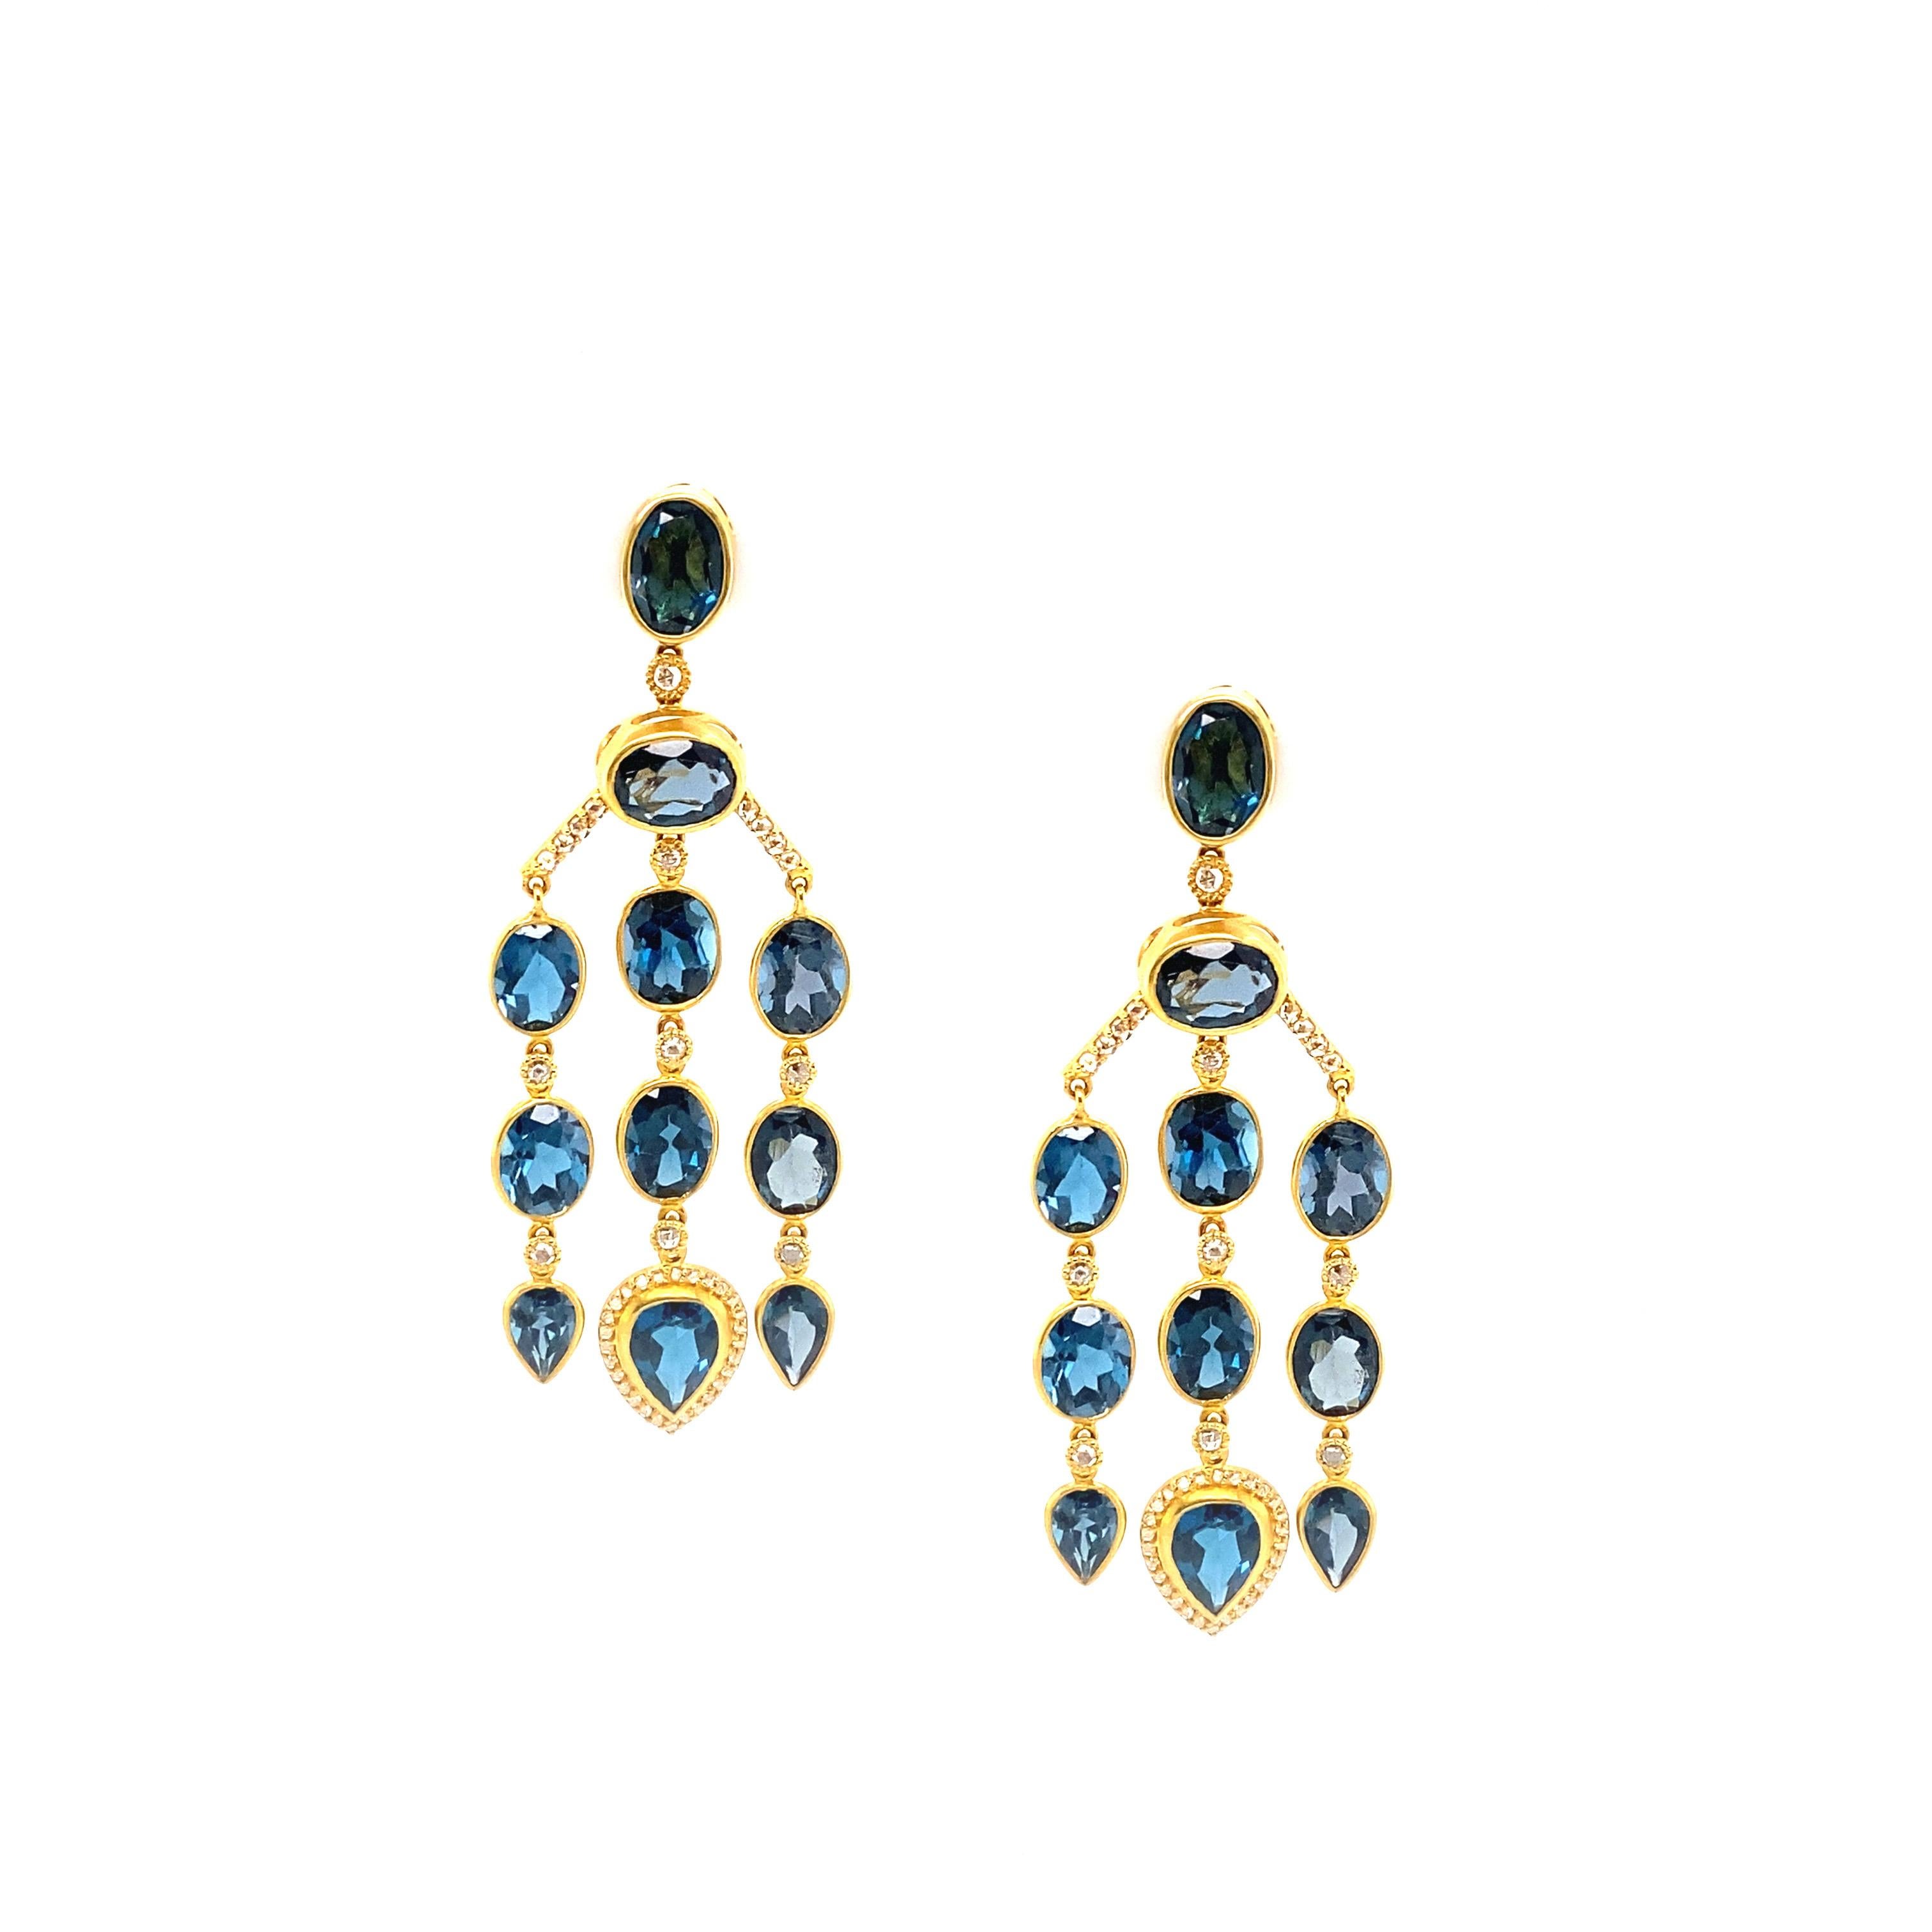 Contemporary 42.33 Carat Mystic Blue Topaz Curtain Earrings with Diamonds For Sale